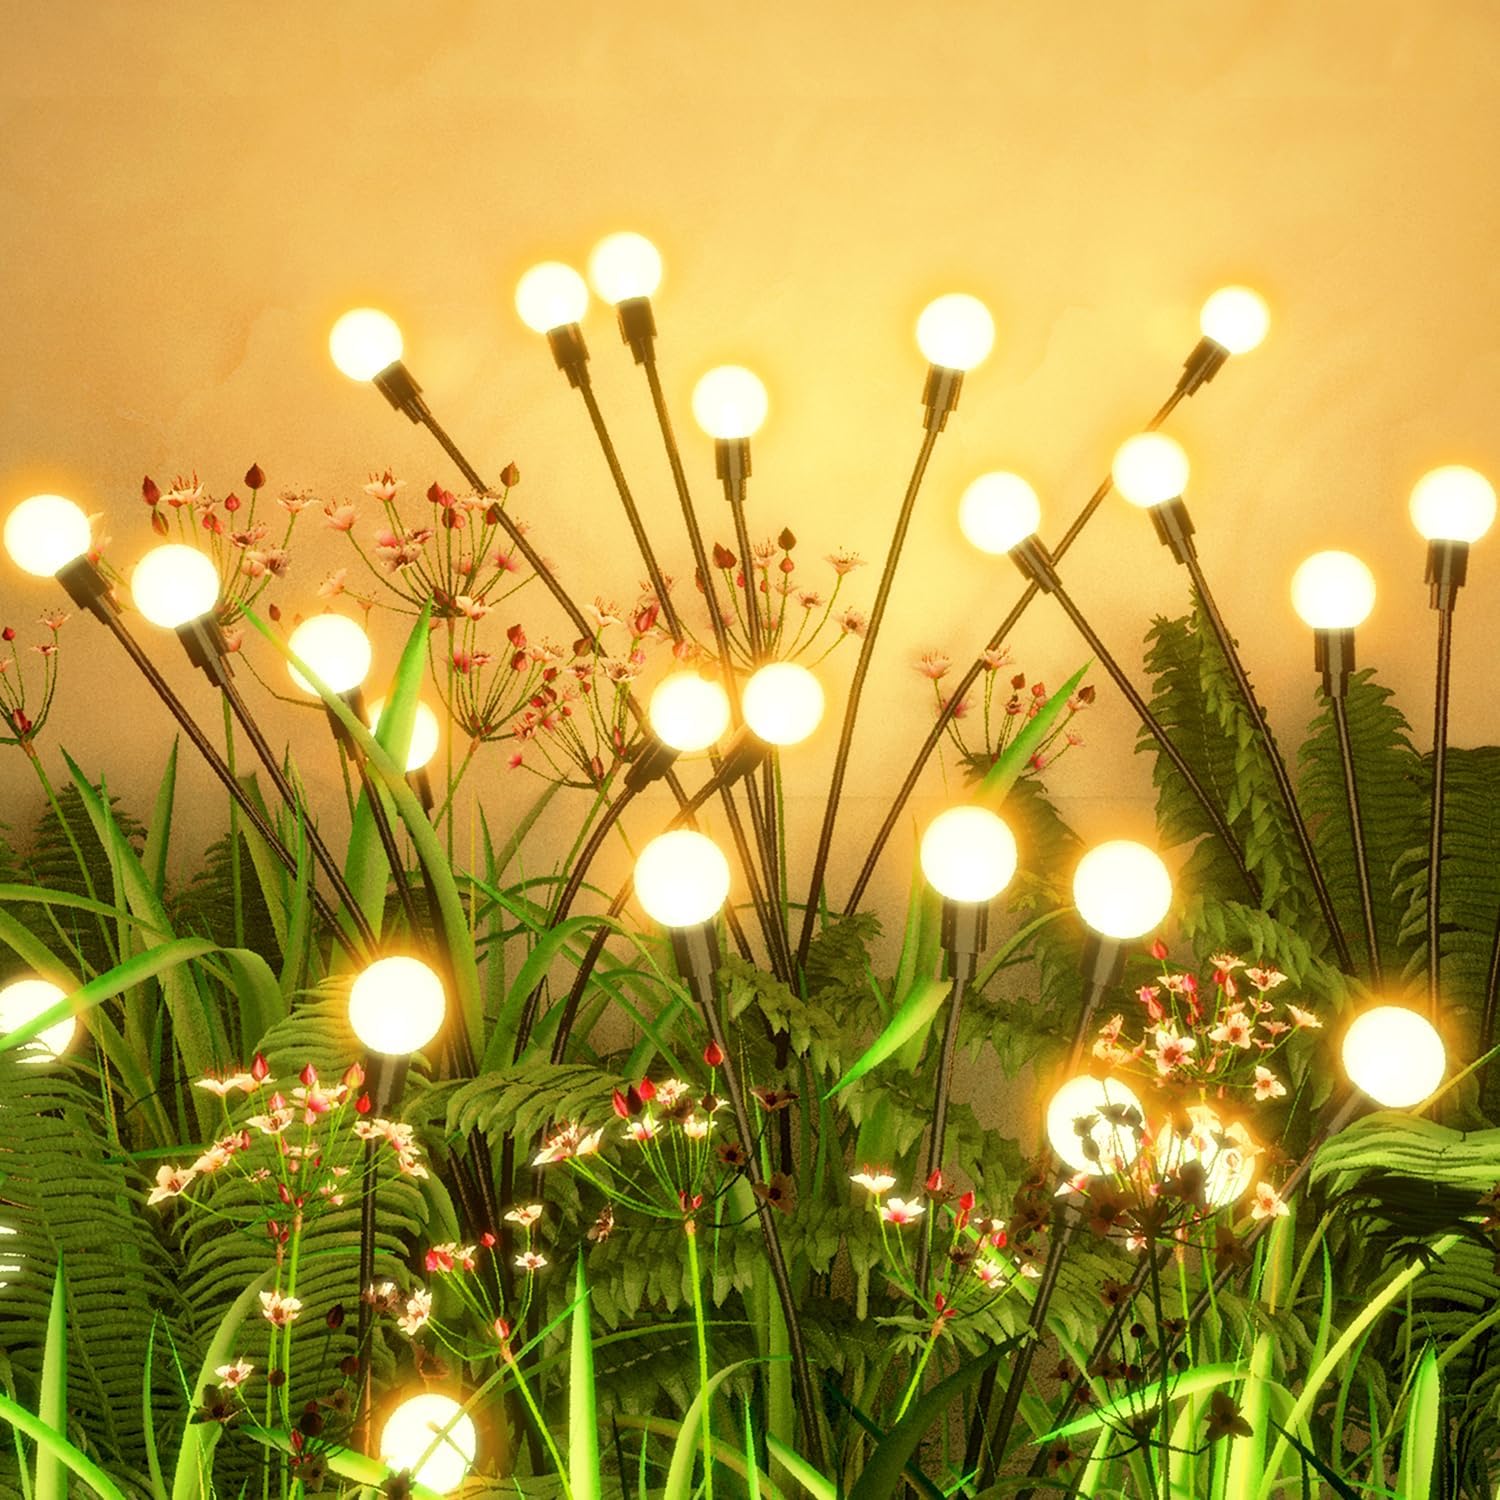 Very nice solar lights! You can set them different ways and love how they sway with the wind!Nice and bright and fun!